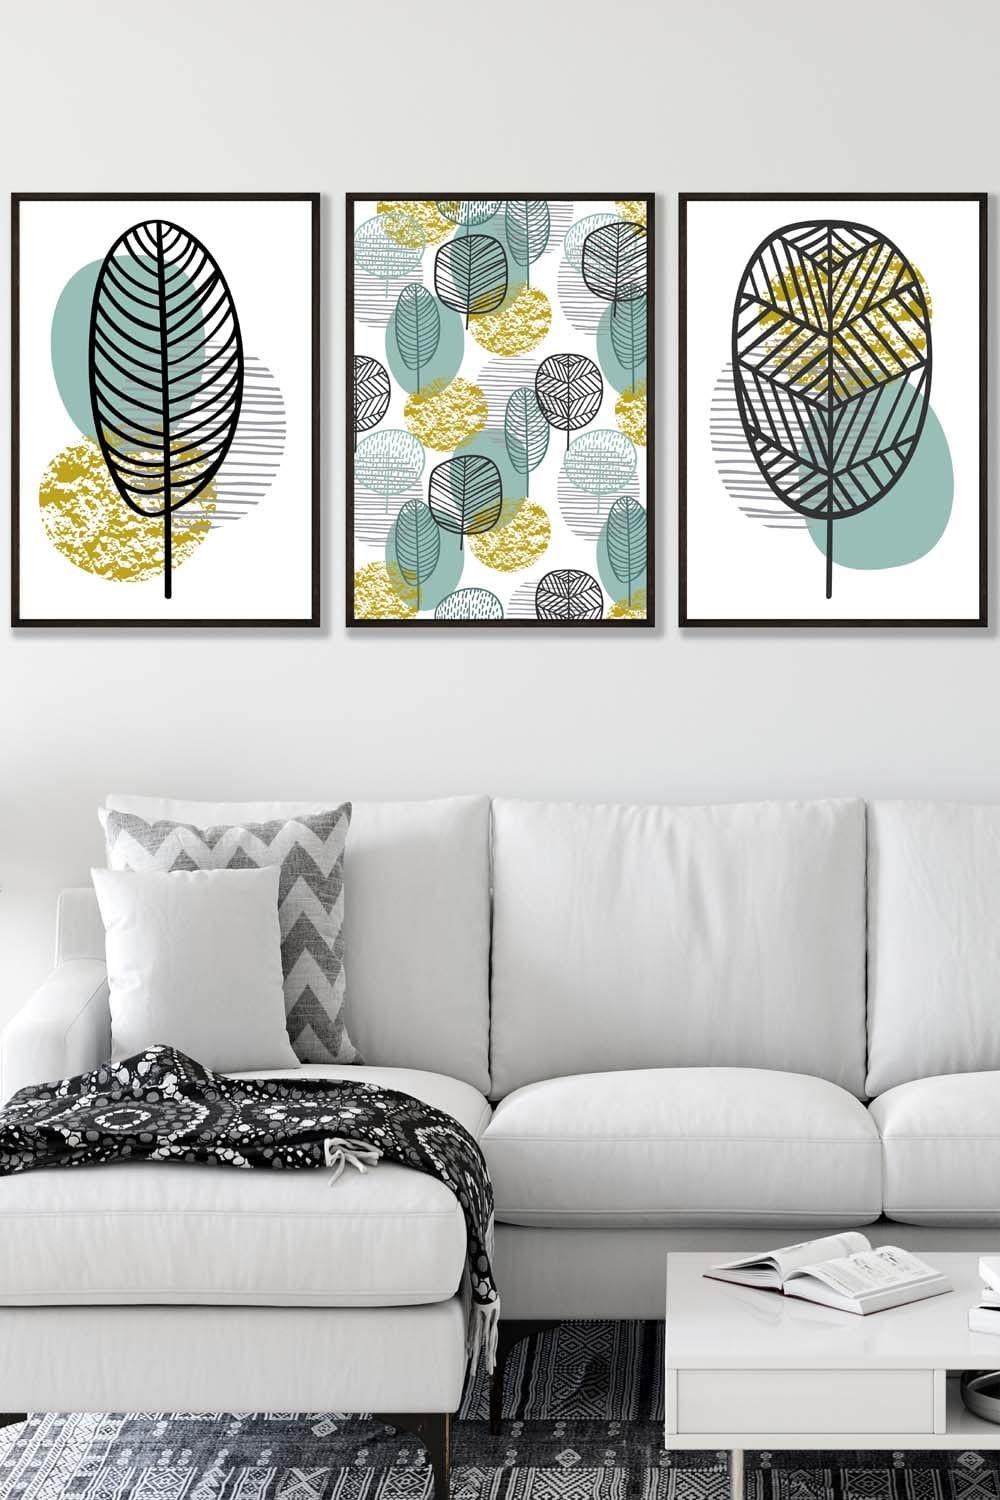 Set of 3 Black Framed Mid Century Floral Pattern in Yellow and Blue Wall Art